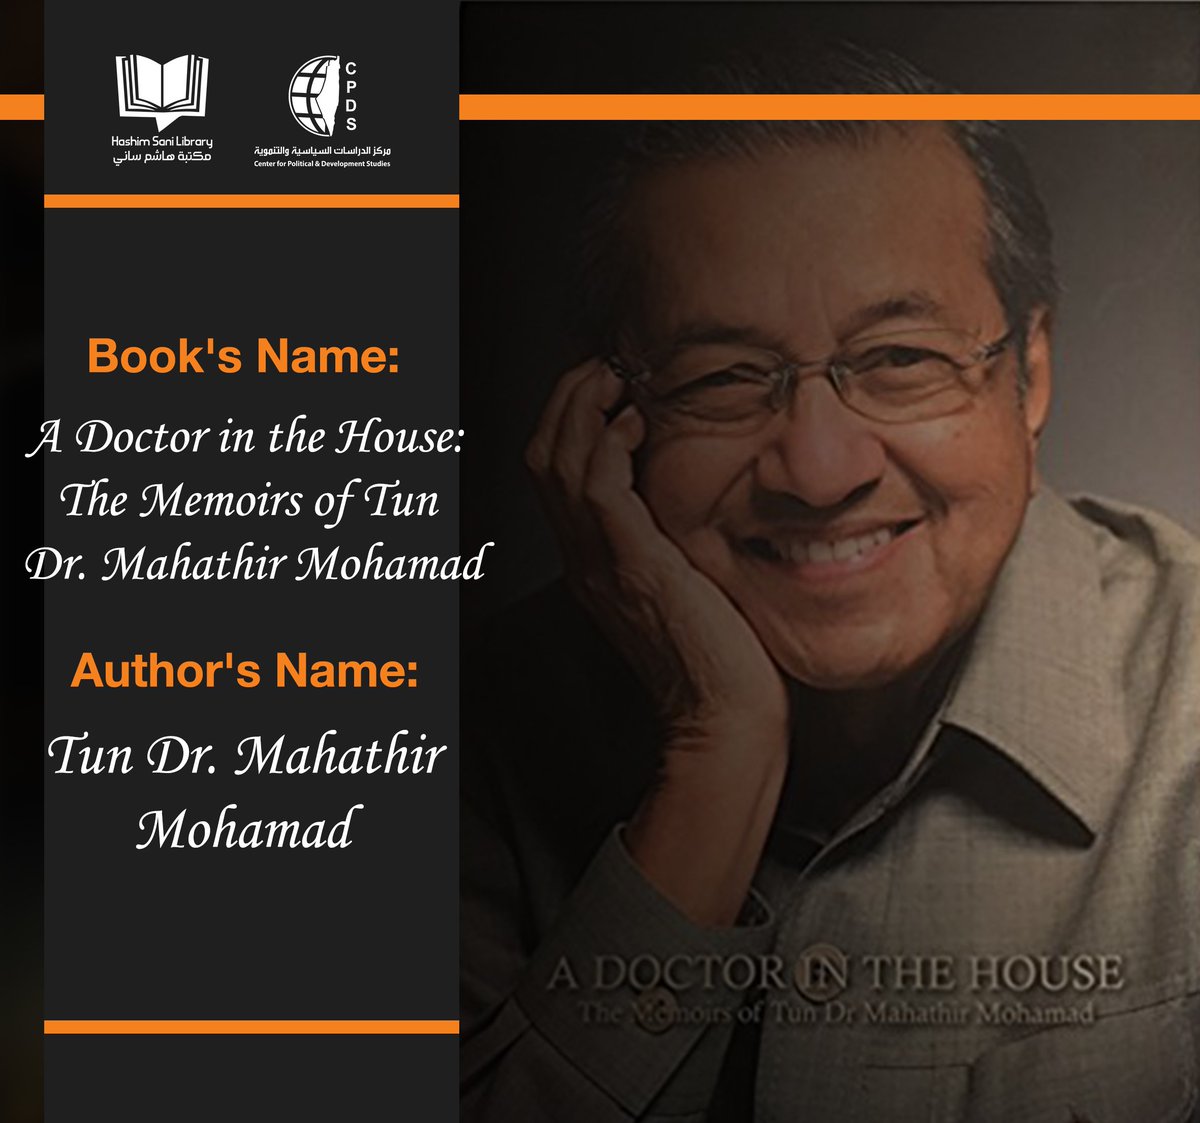 a doctor in the house: the memoirs of tun dr. mahathir mohamad